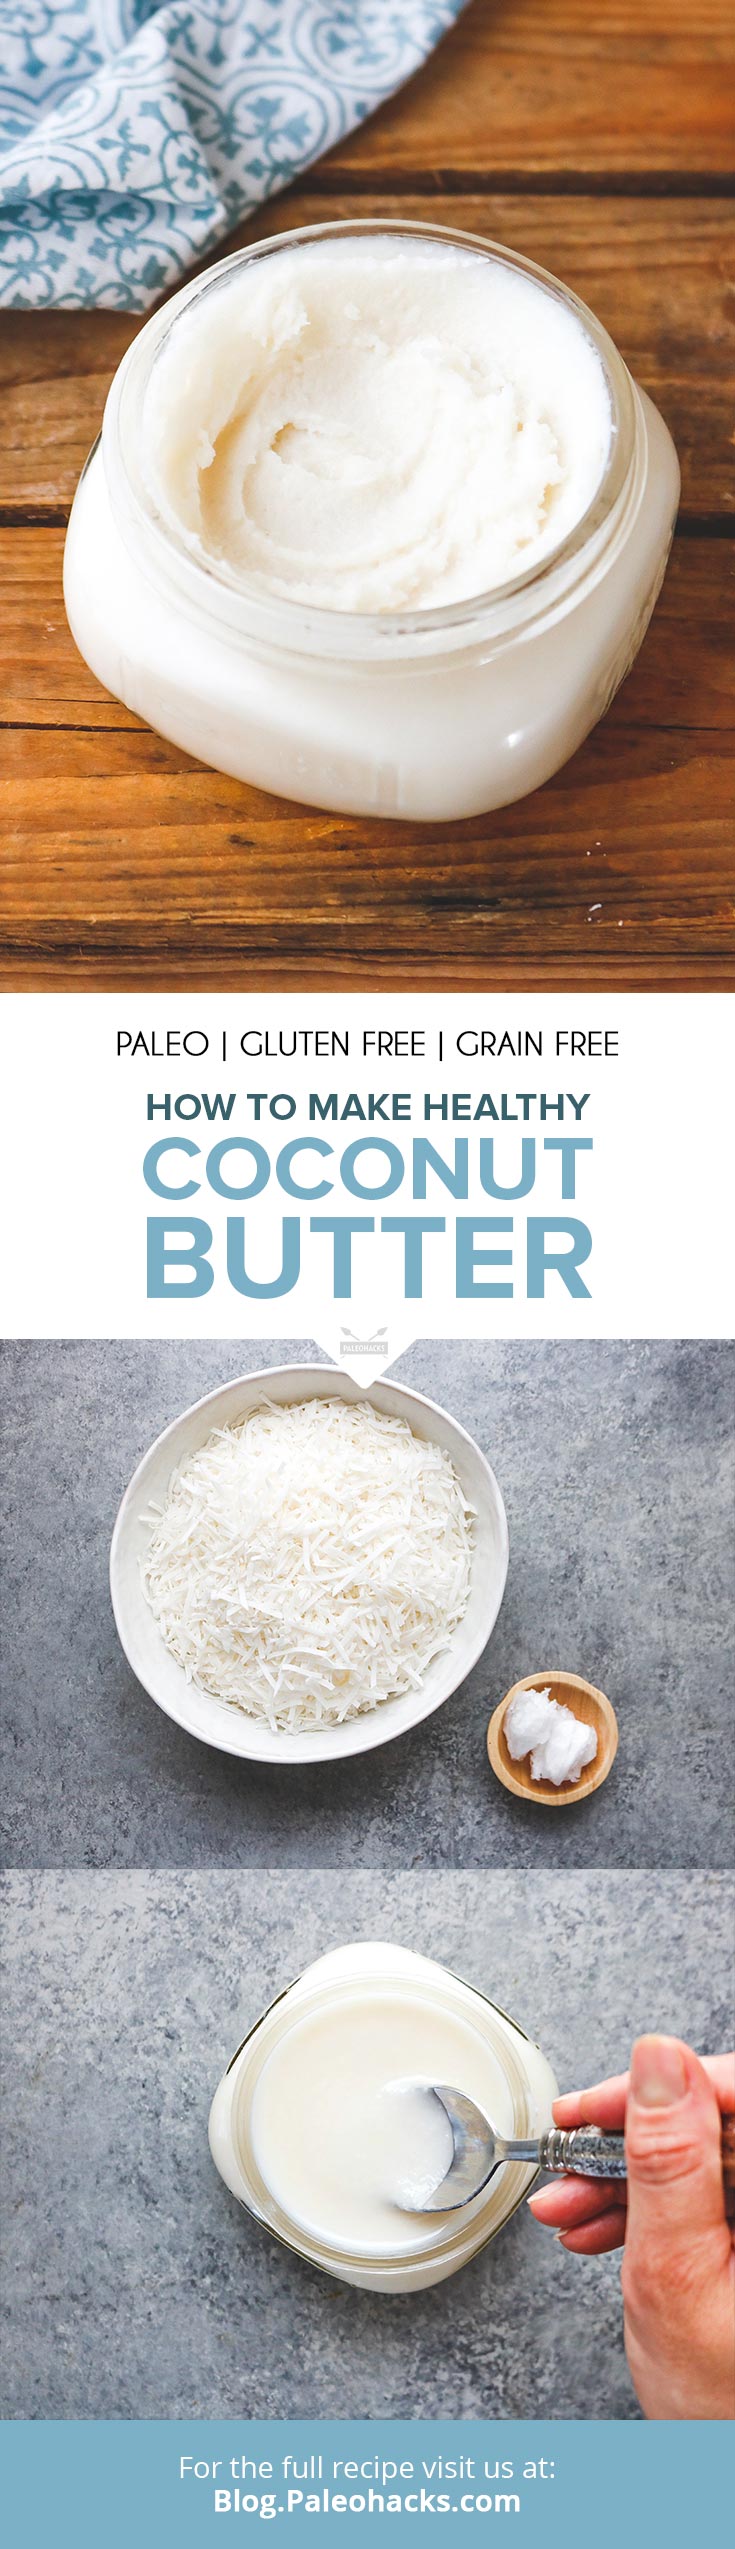 Use this two-ingredient coconut butter for dips, spreads, or drizzling on top of pancakes. Currently spreading this on everything!